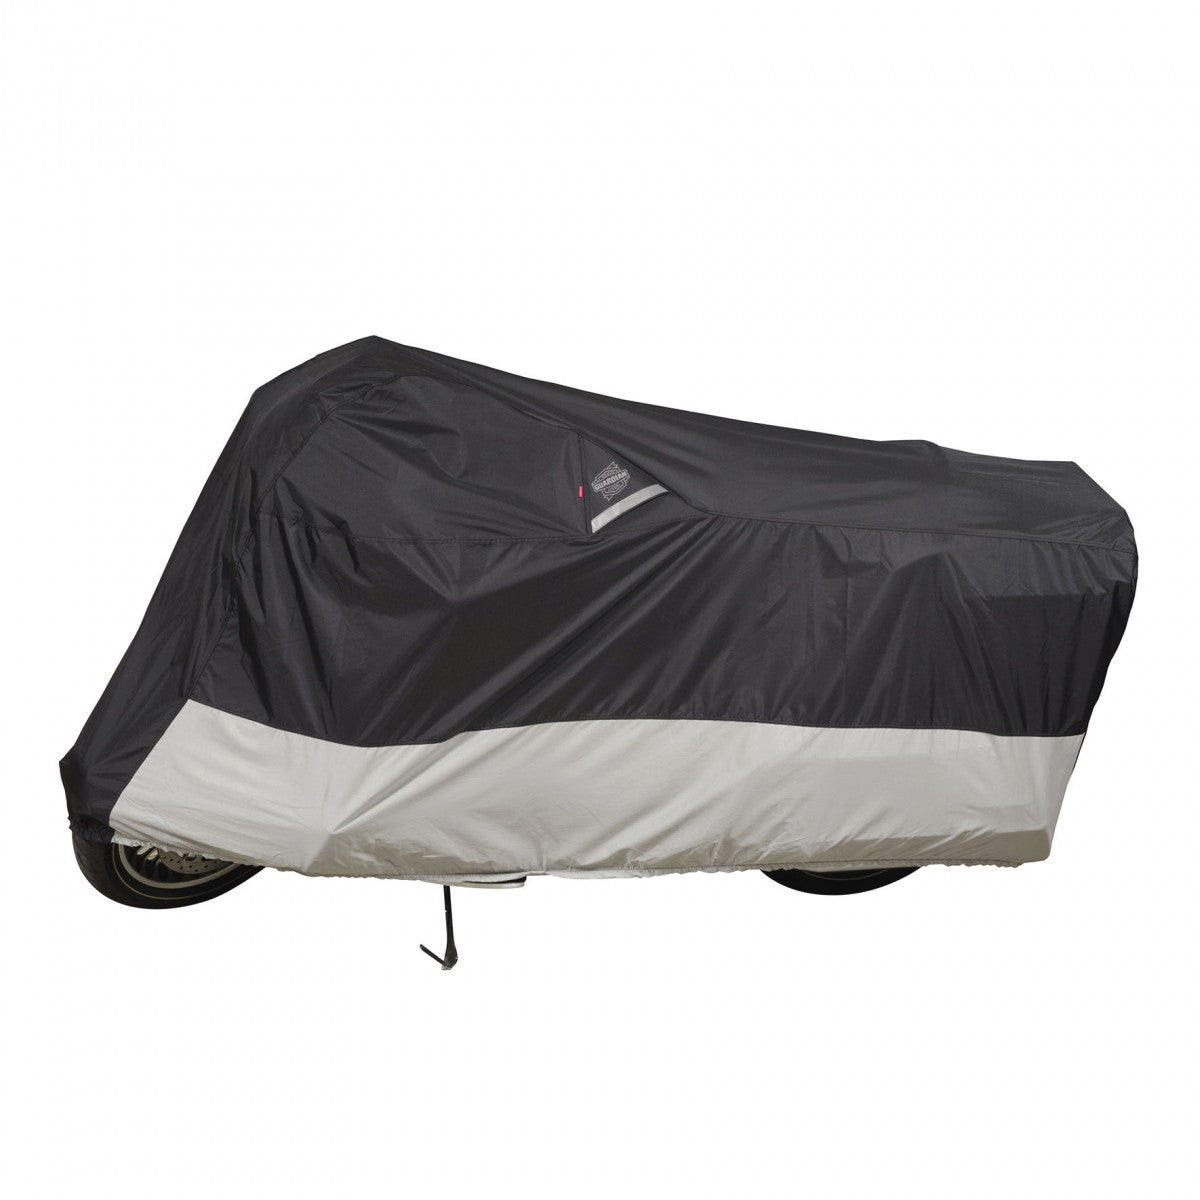 DOWCO - GUARDIAN WEATHERALL PLUS MOTORCYCLE COVER